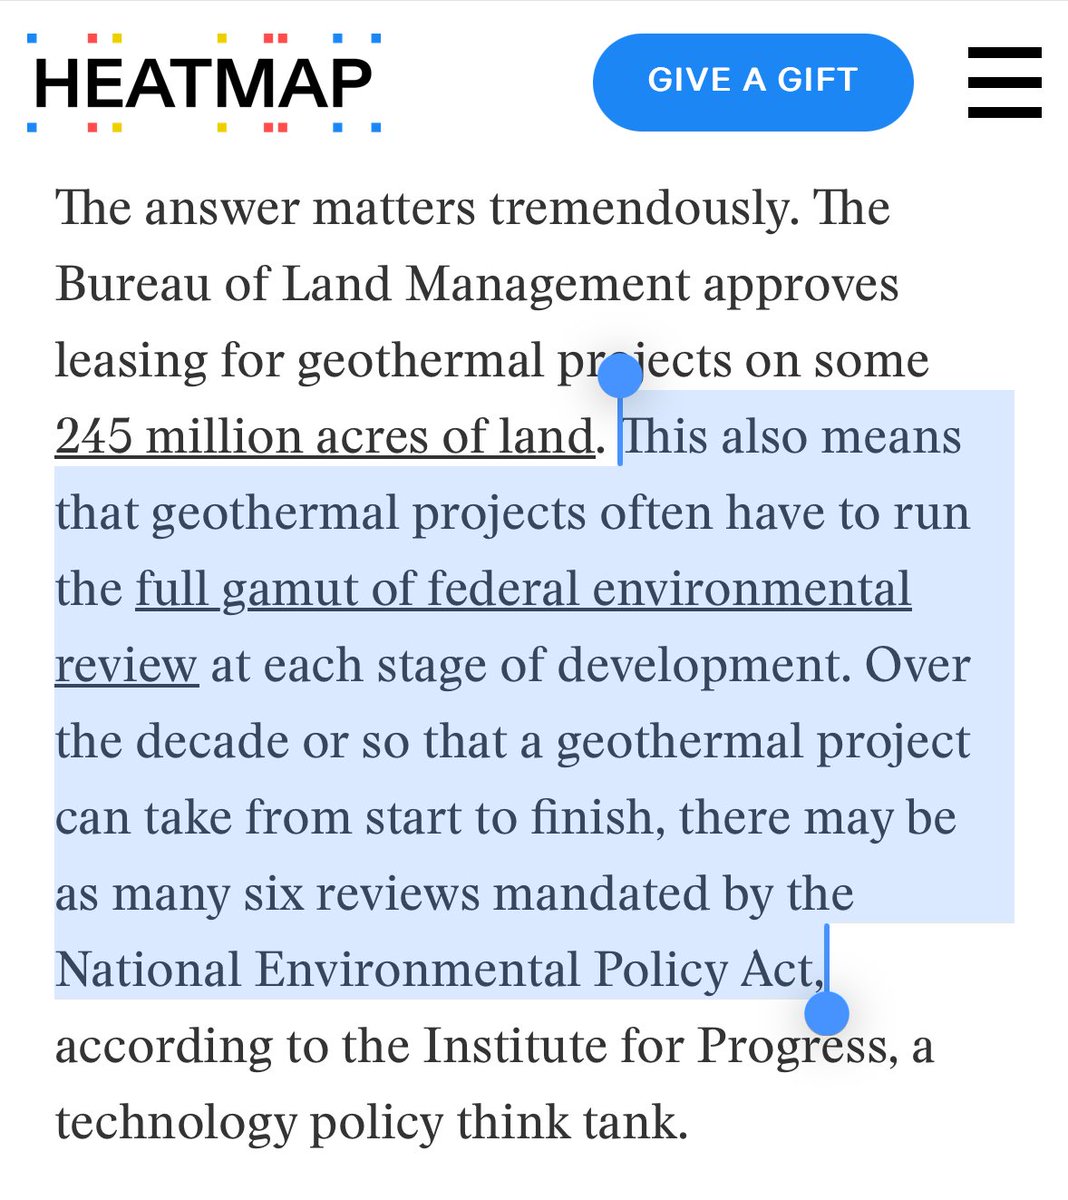 Controversial opinion: Six environmental reviews for one geothermal project is too many.